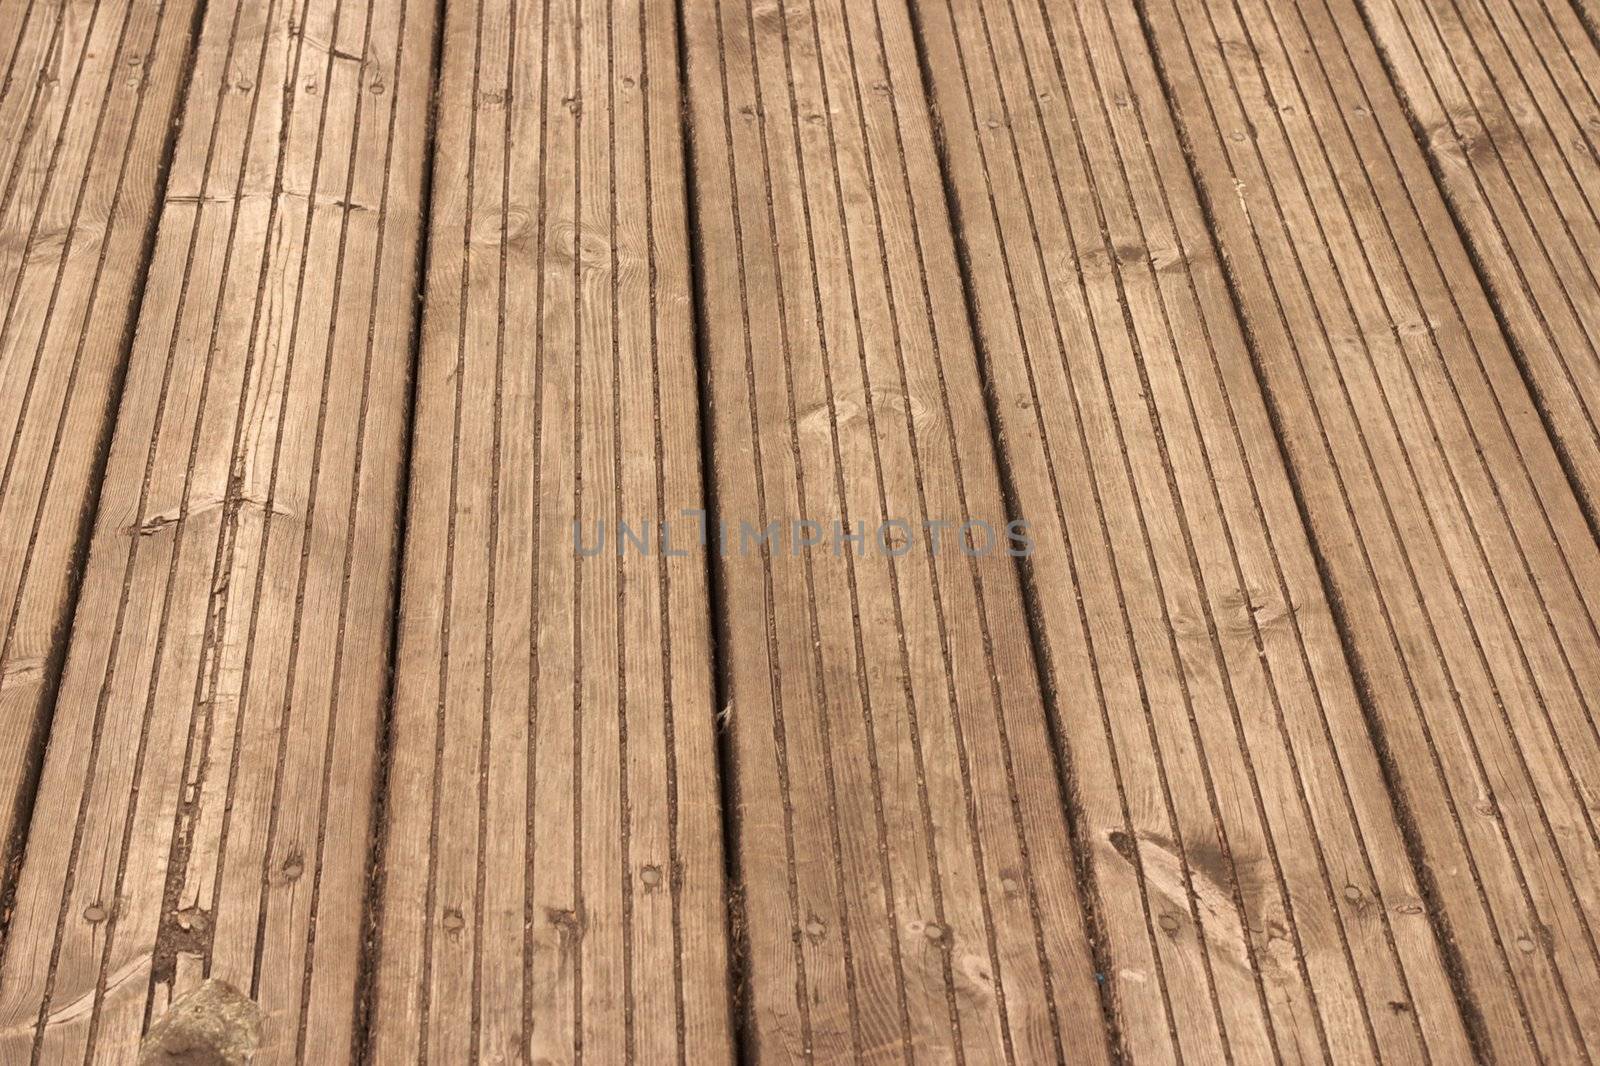 old, weathered wooden floor with perspective, taken outdoors